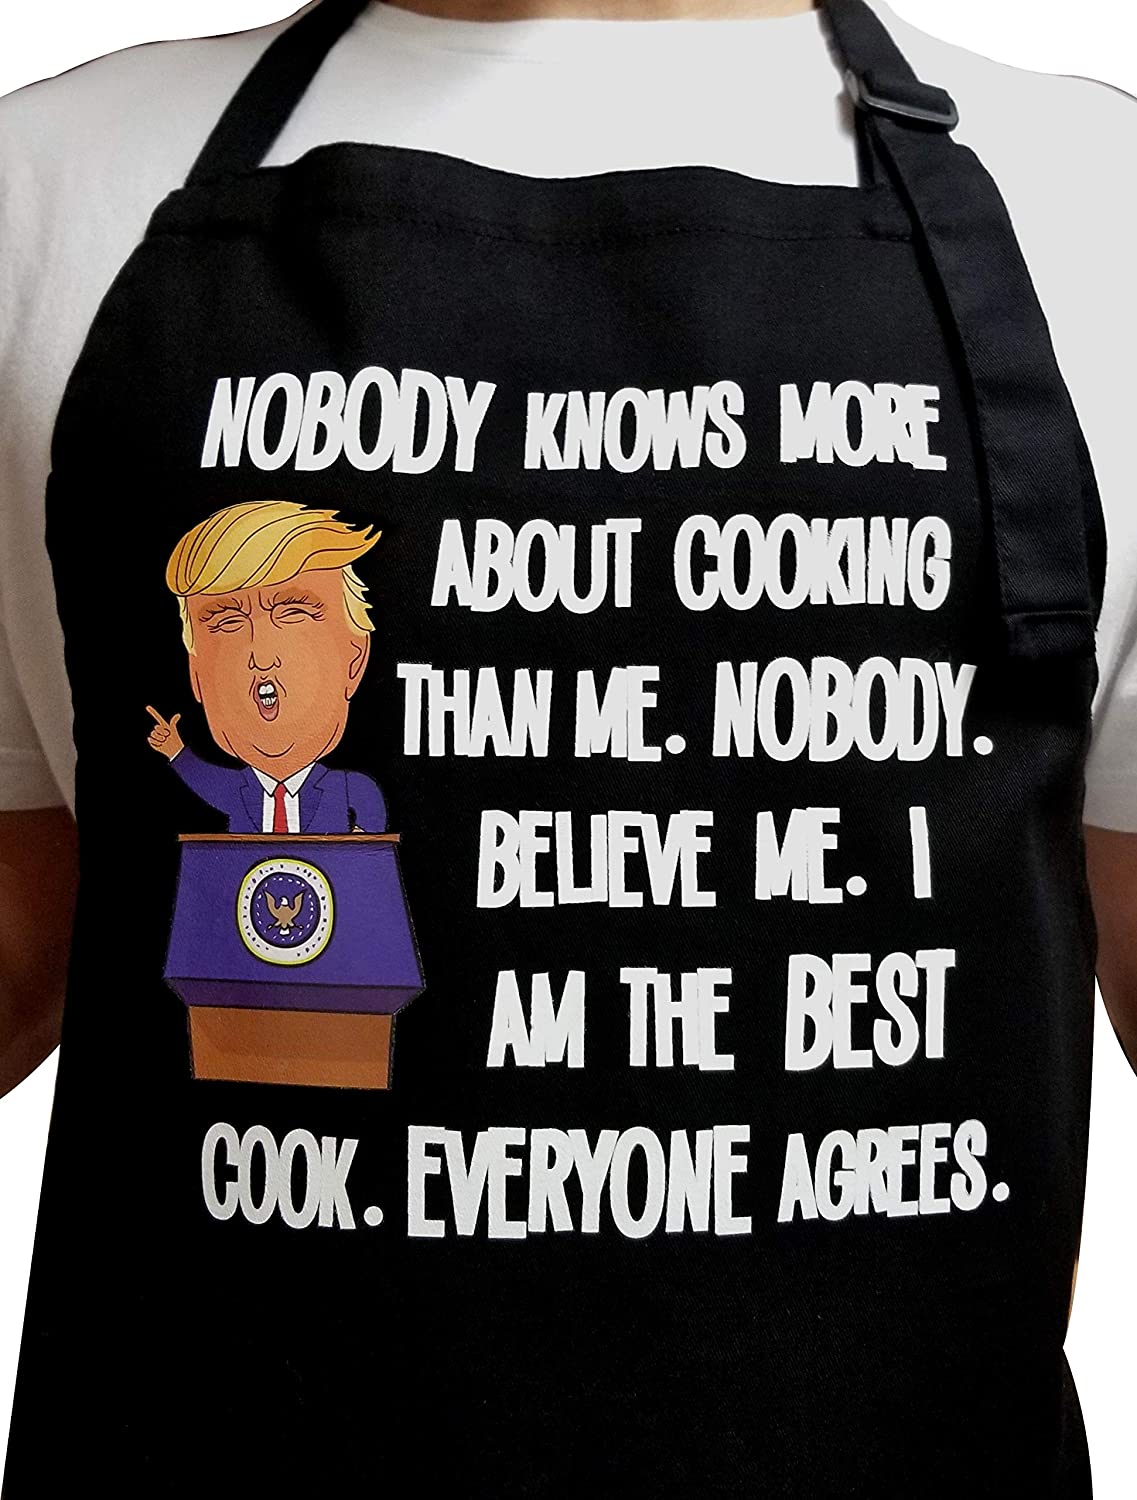 All Prime Outlet Nobody Knows More About Cooking Than Me. Nobody. Believe Me. I Am The Best Cook. Everyone Agrees - Funny Apron -100% Cotton - Universal Size - Adjustable Neck Strap - 2 Pockets